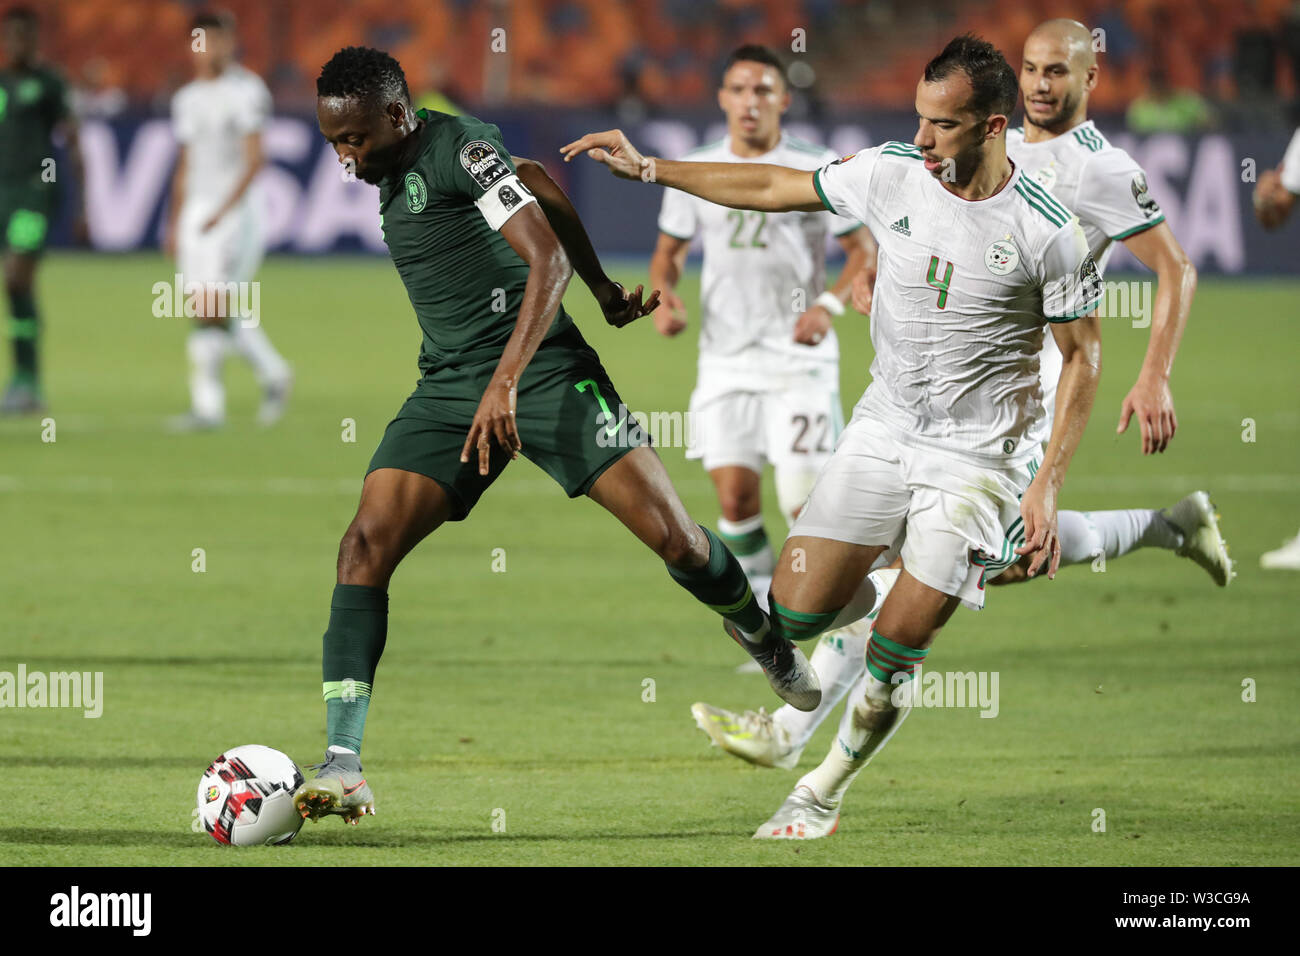 Cairo, Egypt. 14th July, 2019. Algeria's Djamel Benlamri (R) and Nigeria's Ahmed Musa battle for the ball during the 2019 Africa Cup of Nations semi-final soccer match between Algeria and Nigeria at the Cairo International Stadium. Credit: Oliver Weiken/dpa/Alamy Live News Stock Photo